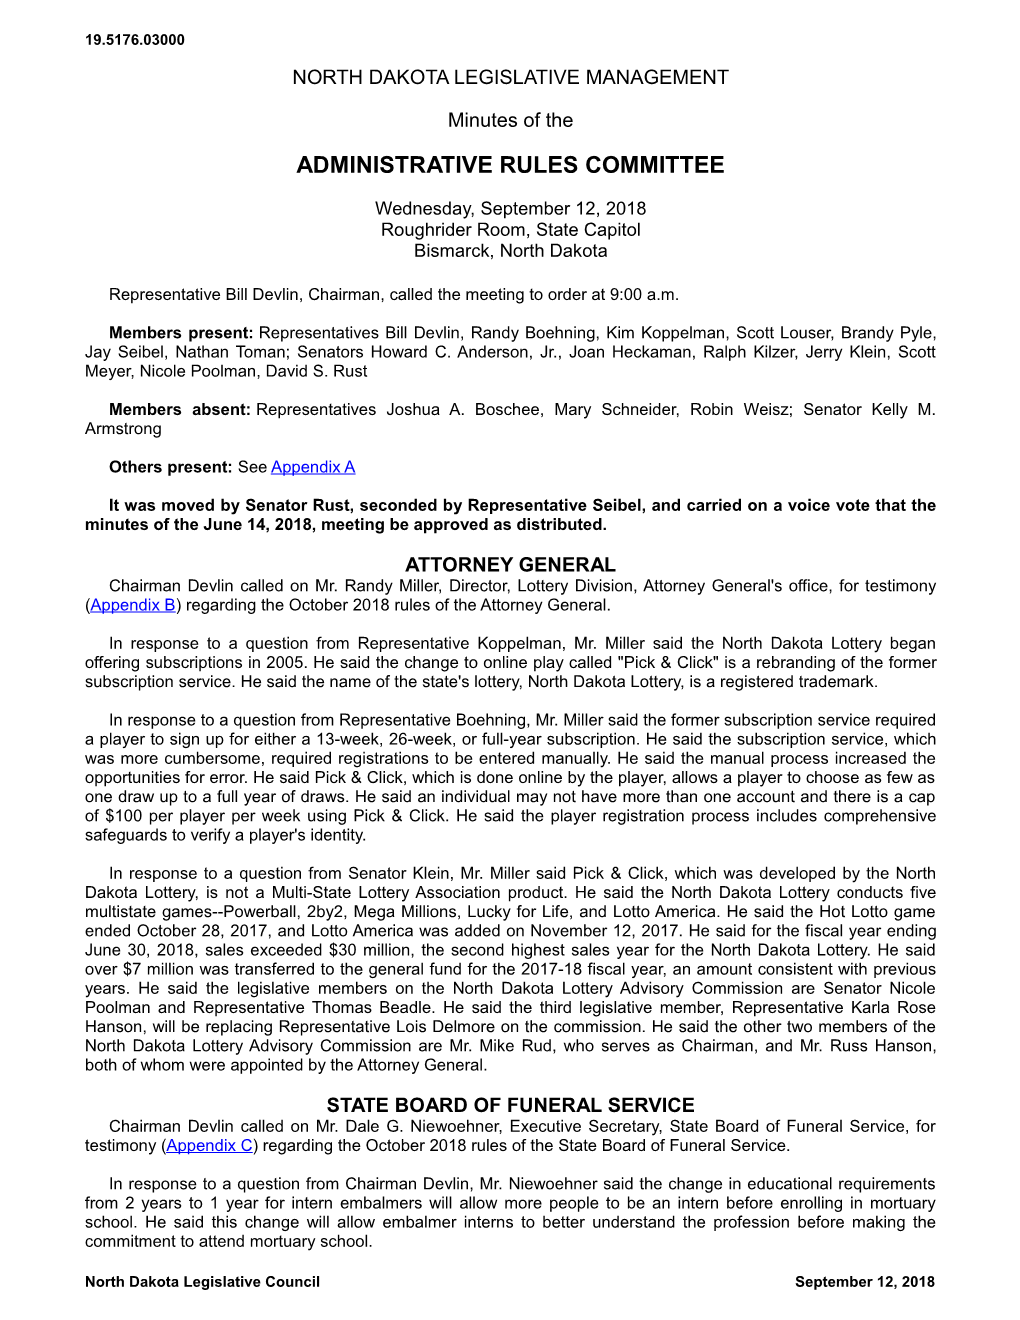 Administrative Rules Committee